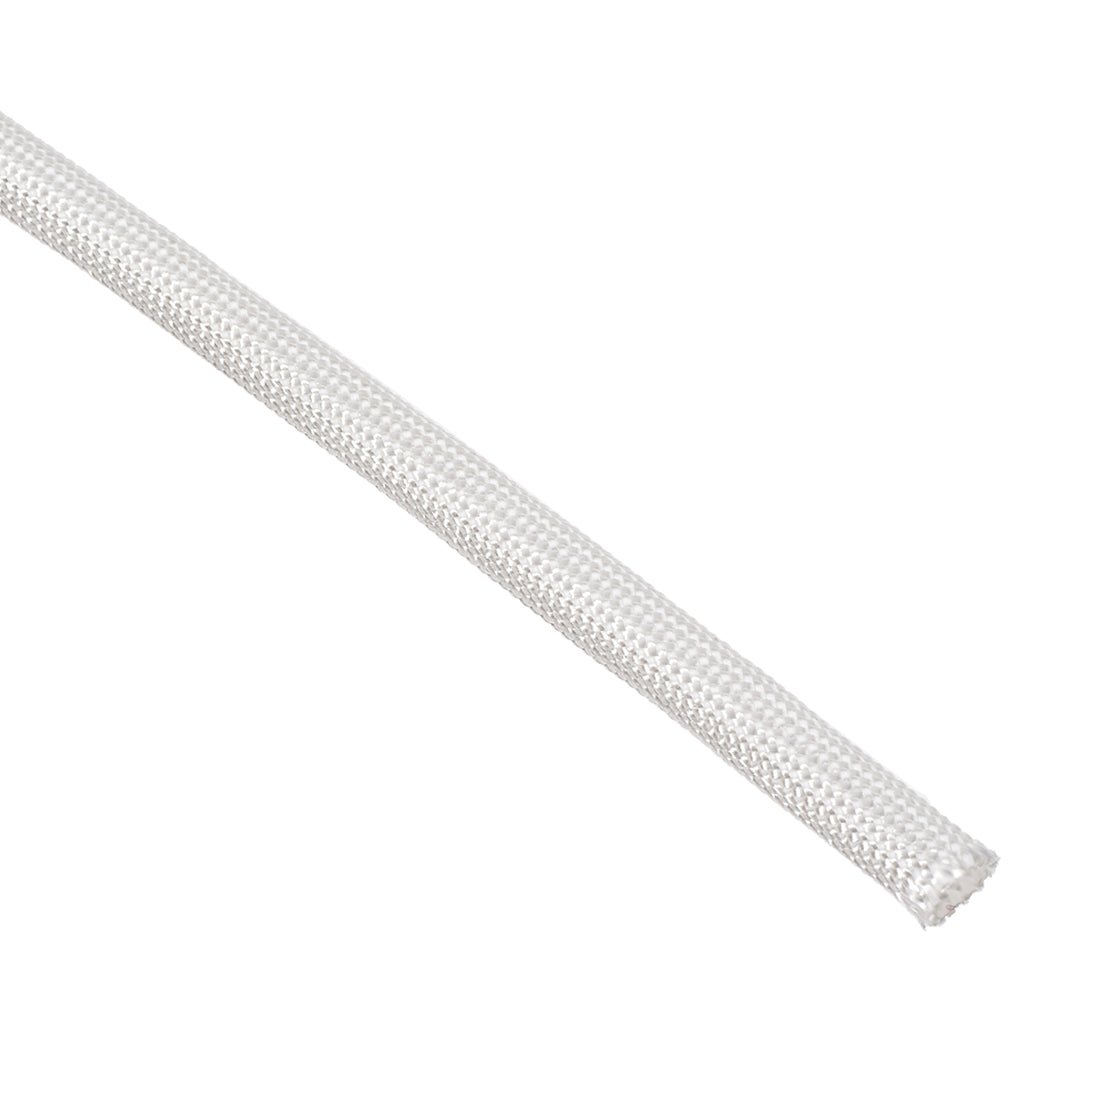 Uxcell Uxcell Insulation Cable Protector, 33Ft-5mm High TEMP Fiberglass Sleeve White